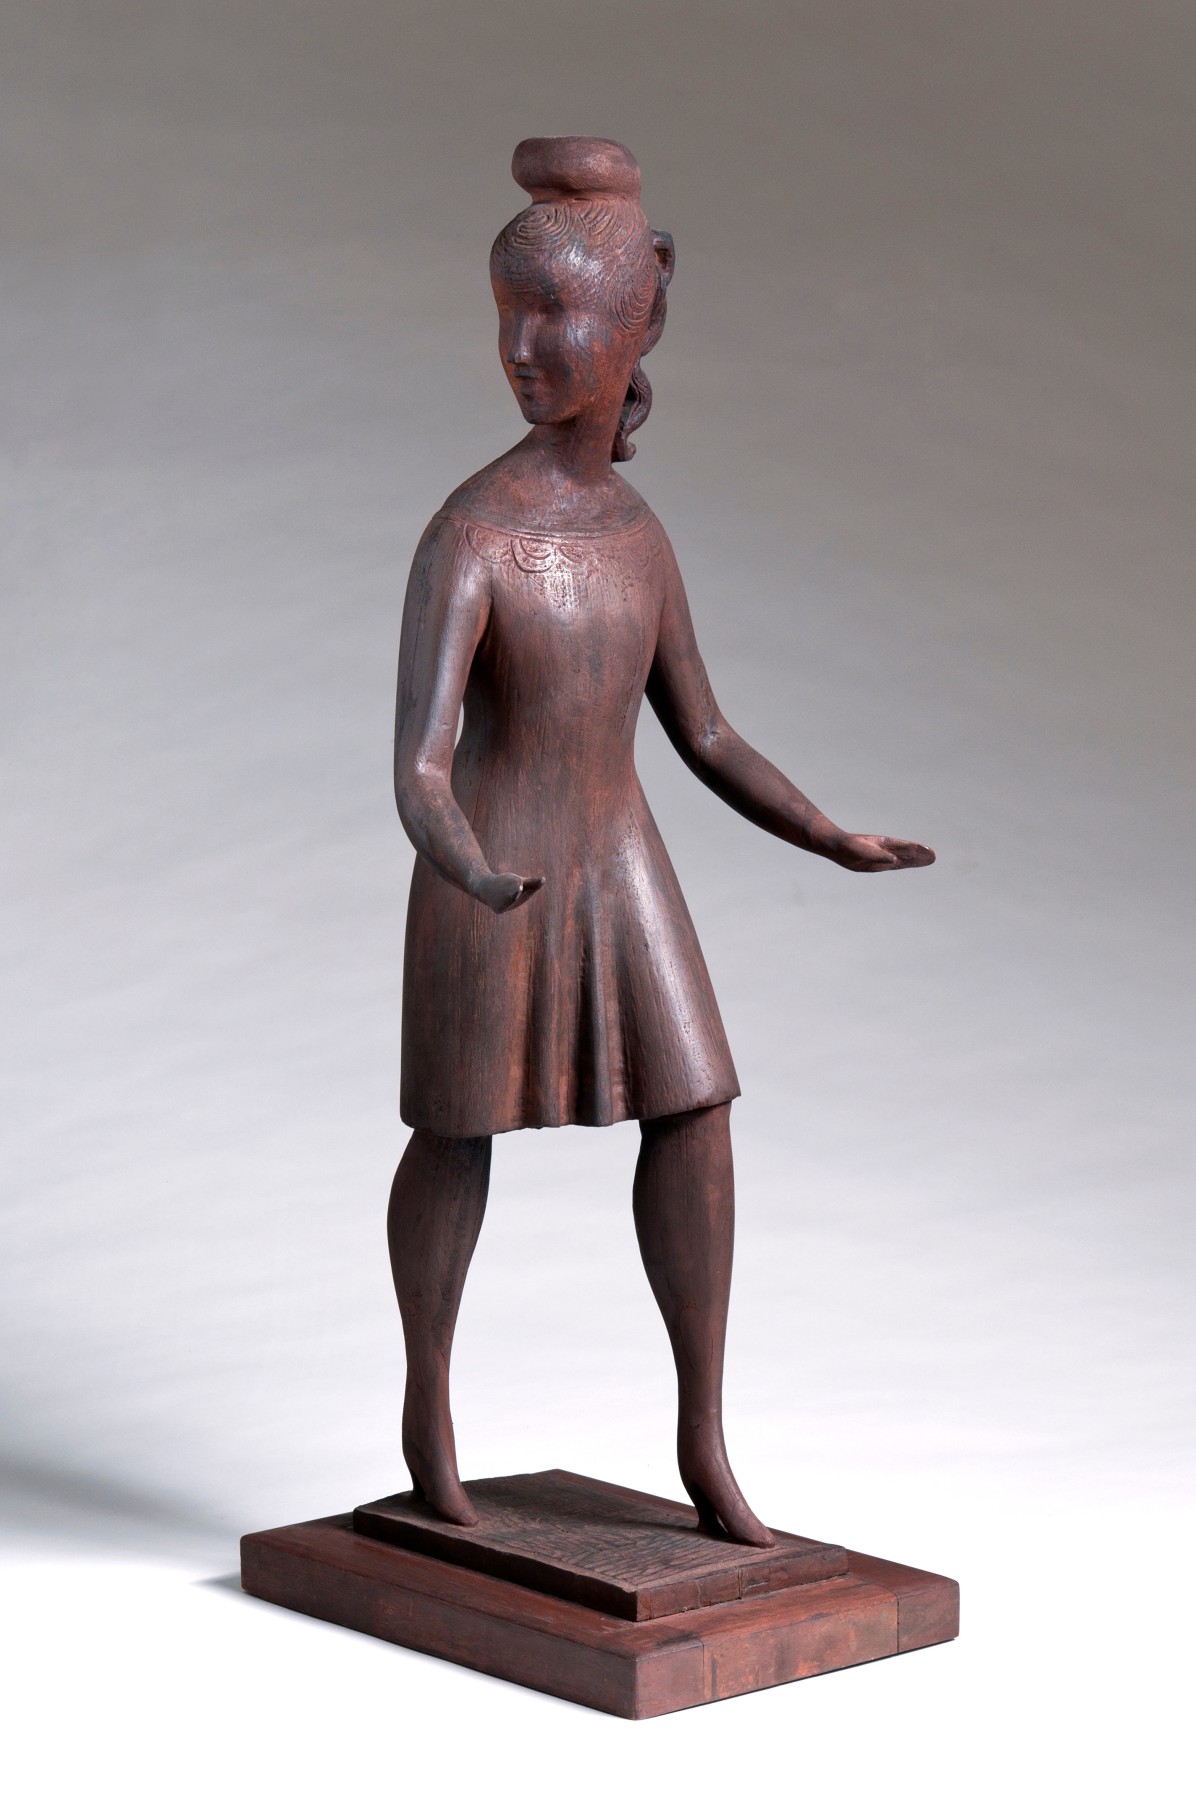 Elie Nadelman, Standing Girl, c. 1918-1920, carved cherry wood, 32 1/2 h x 12 3/8 w x 13 5/8 d inches